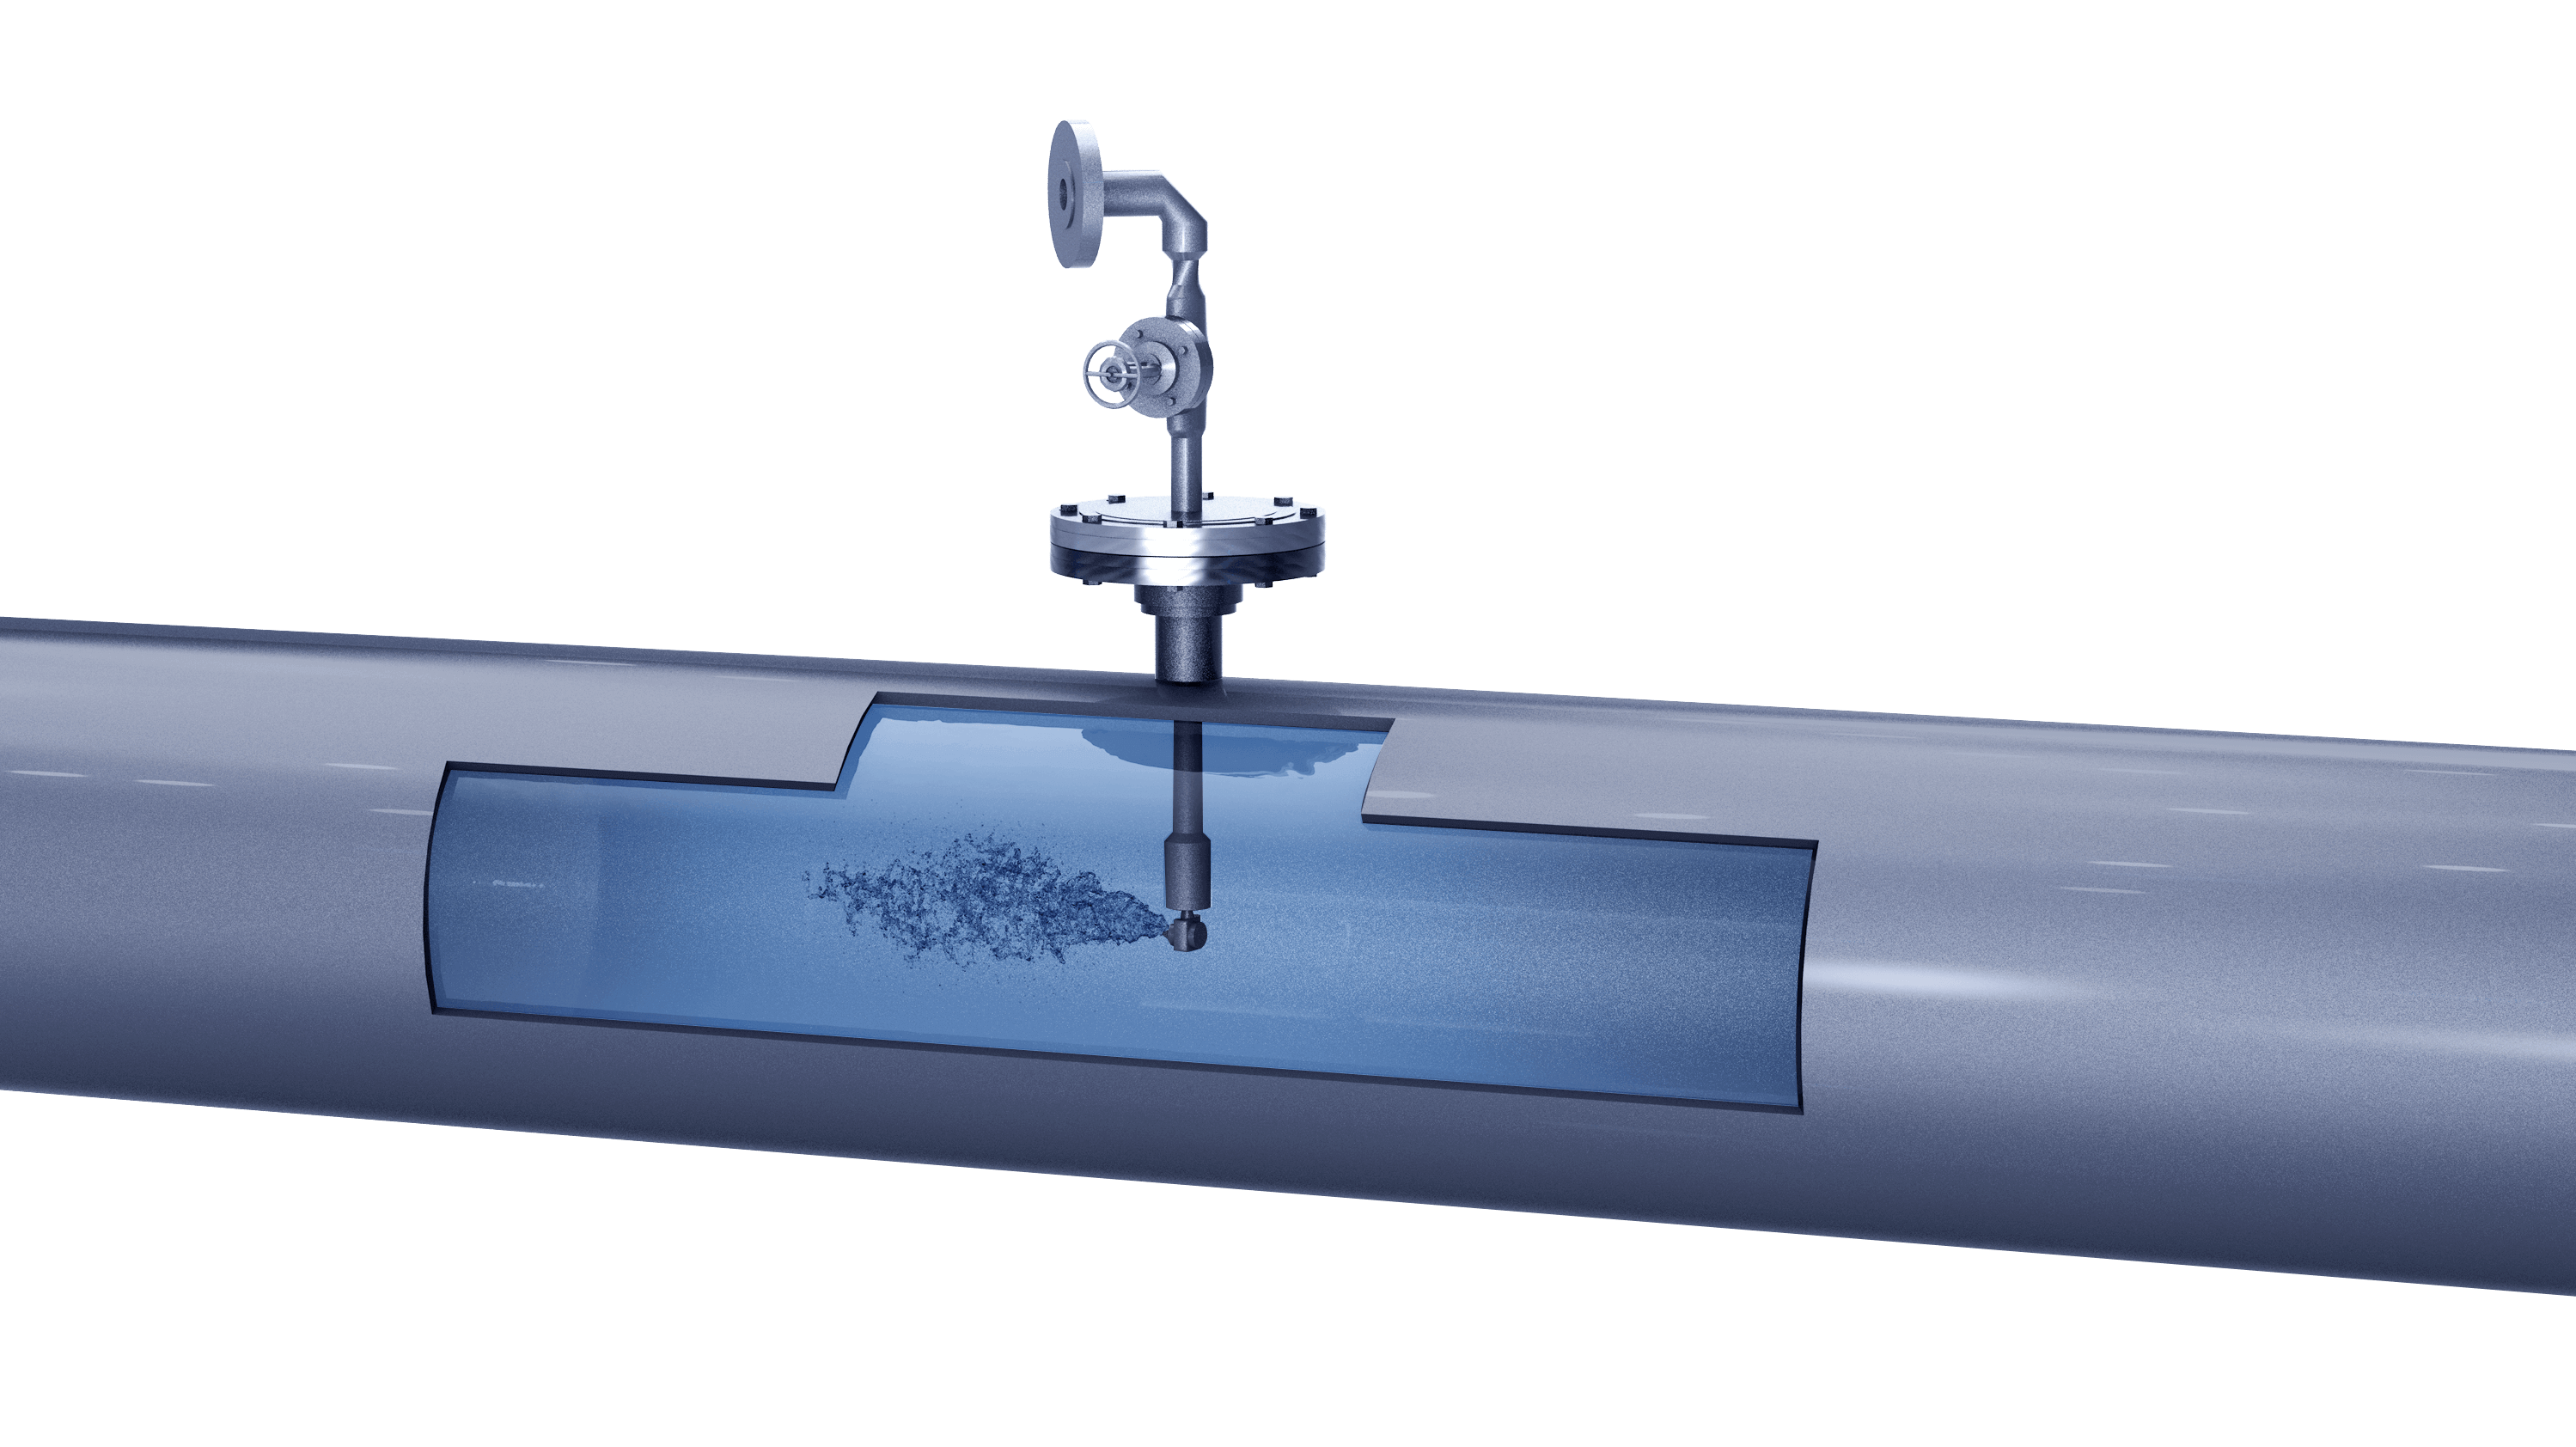 A 3D illustration of a chemical injection spray lance installed by flanges into the duct of a chemical manufacturing process.